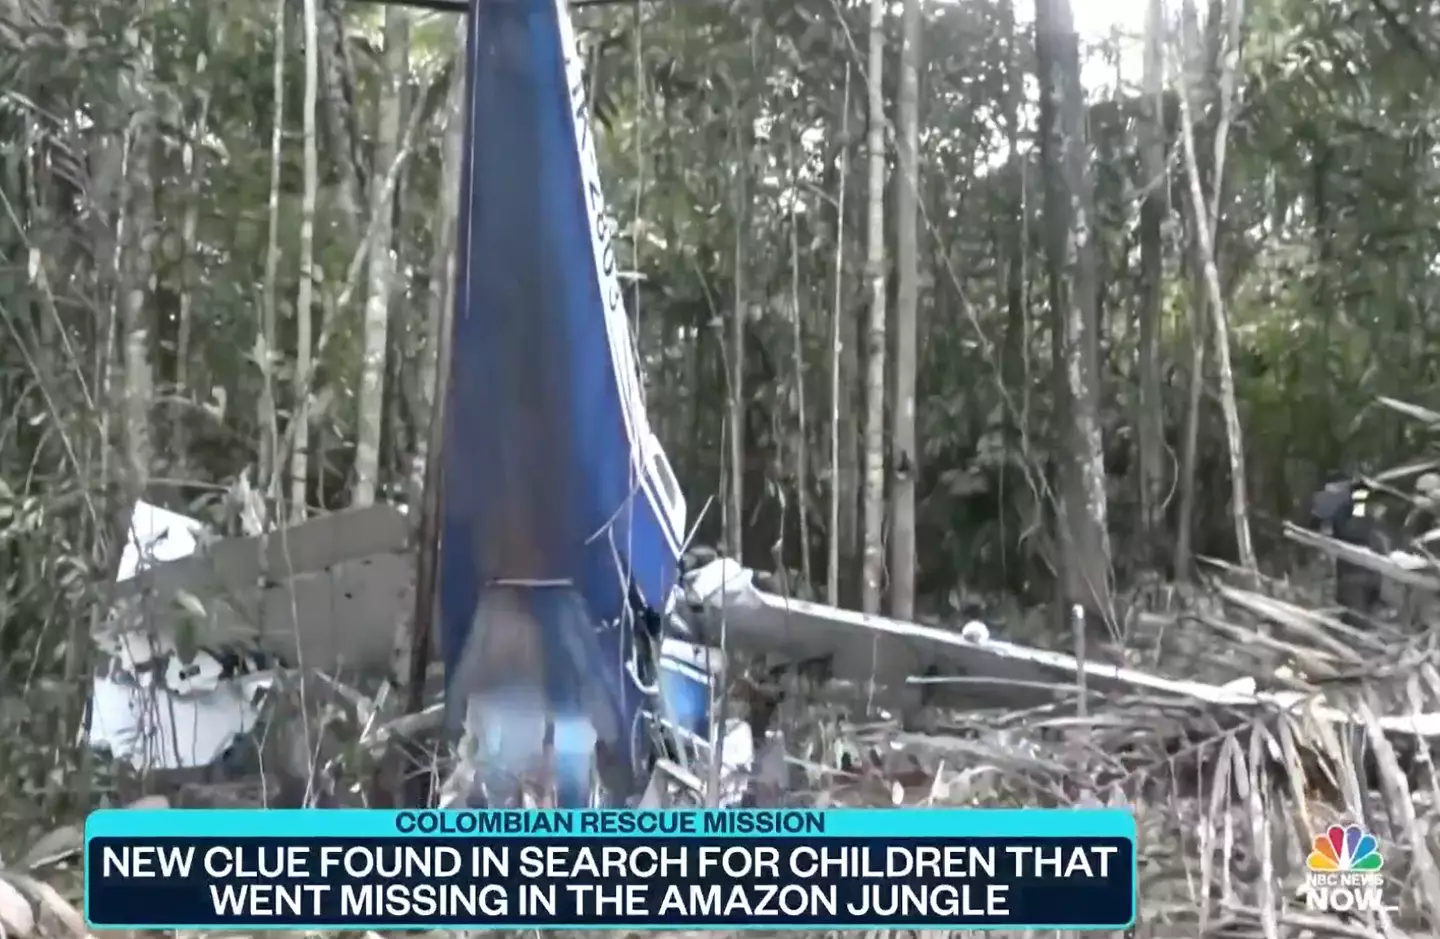 The bodies of three adults were found along with the plane wreckage.